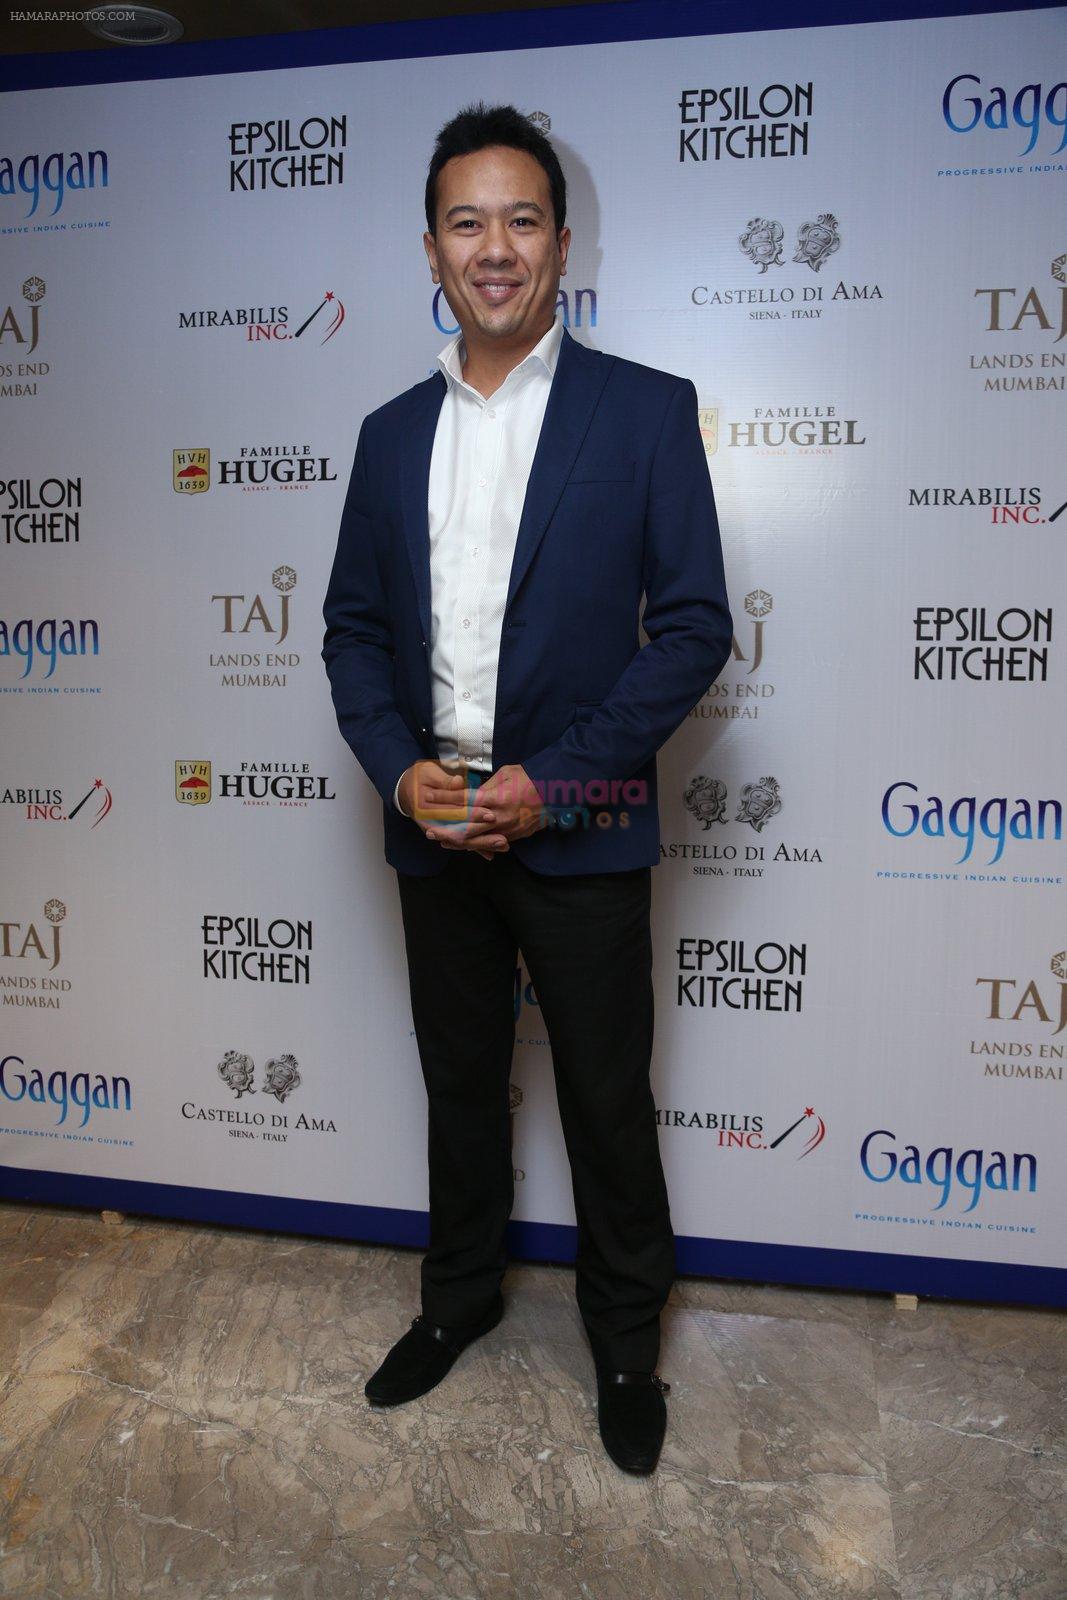 at Chef Gaggan's foodie event on 2nd Sept 2016